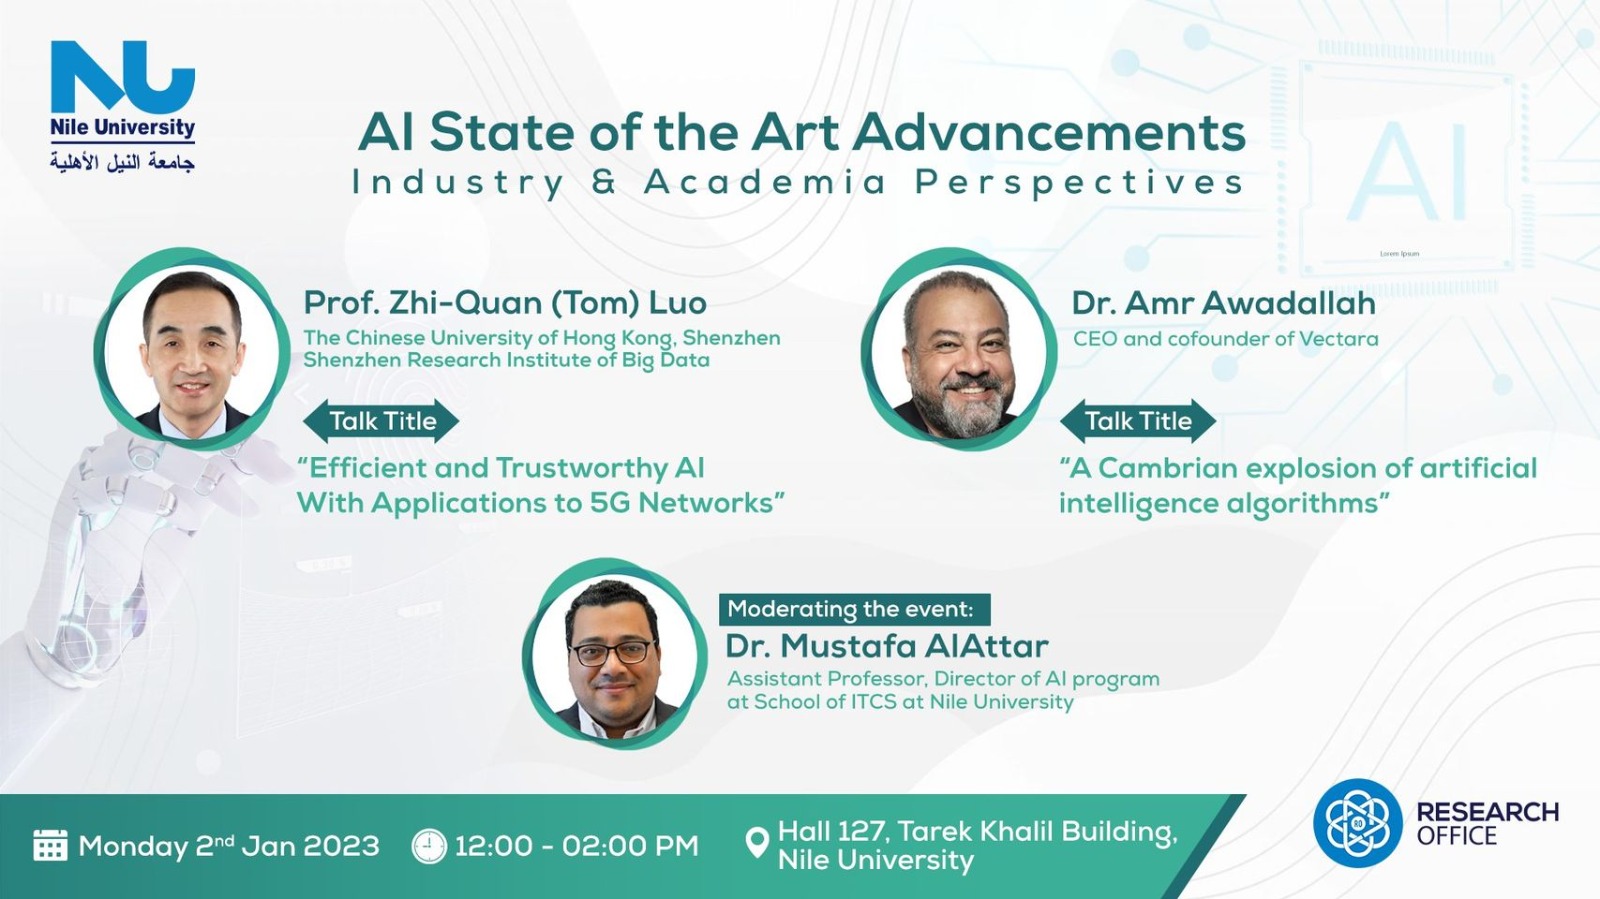 AI State of the Art Advancements Industry & Academia Perspectives